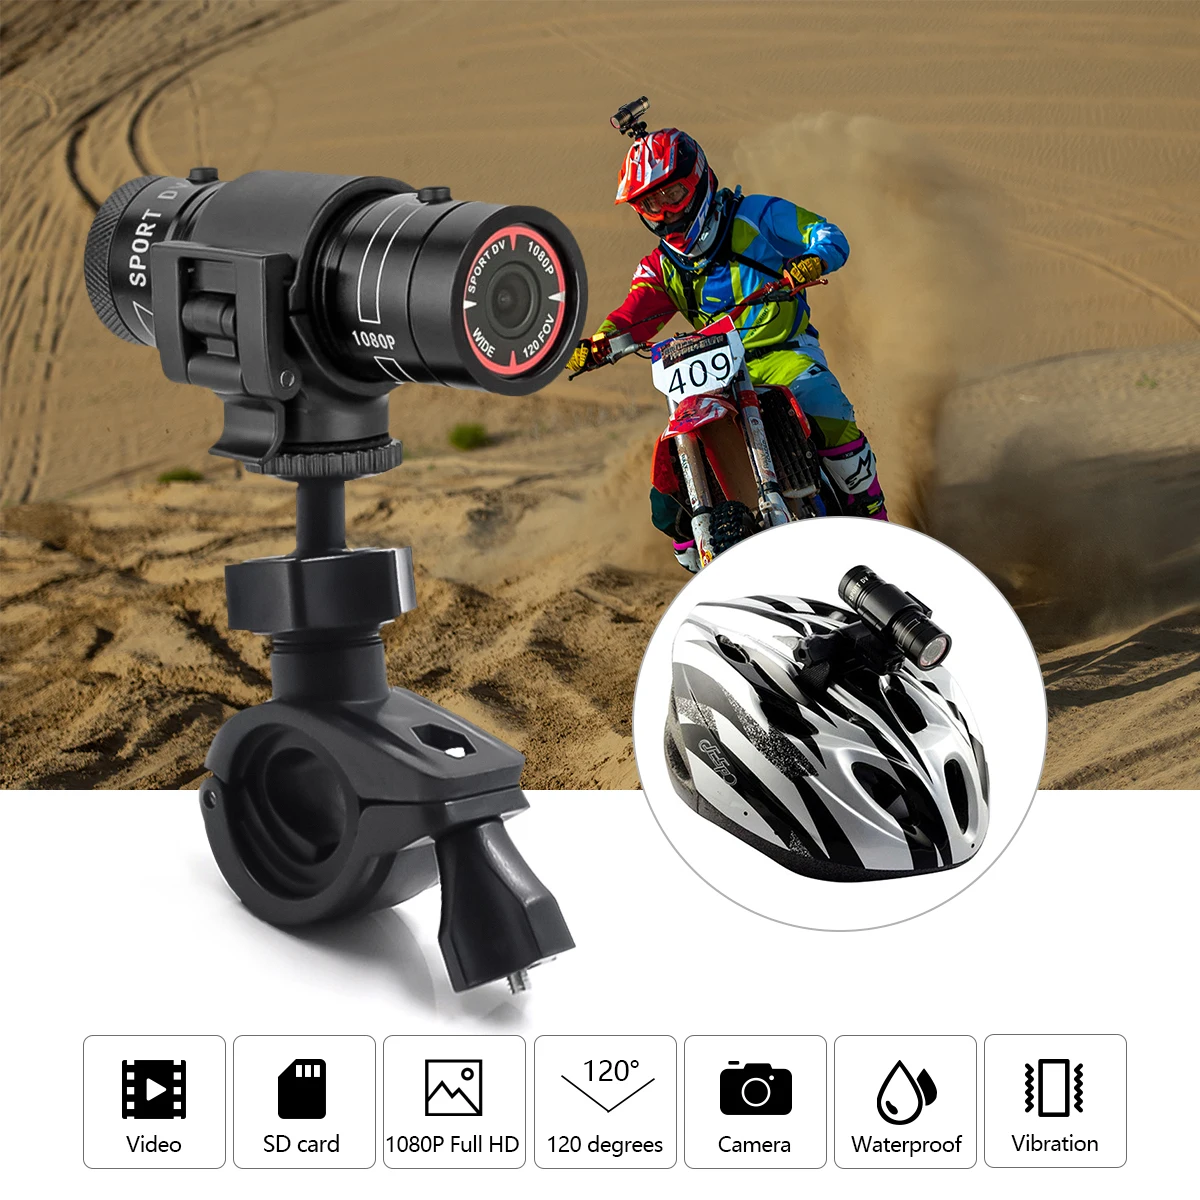 

F9 Camera Hd Bike Motorcycle Sports Action Camera Video Dvr Camcorder Car Digital Video Recorder Auto Vehicle